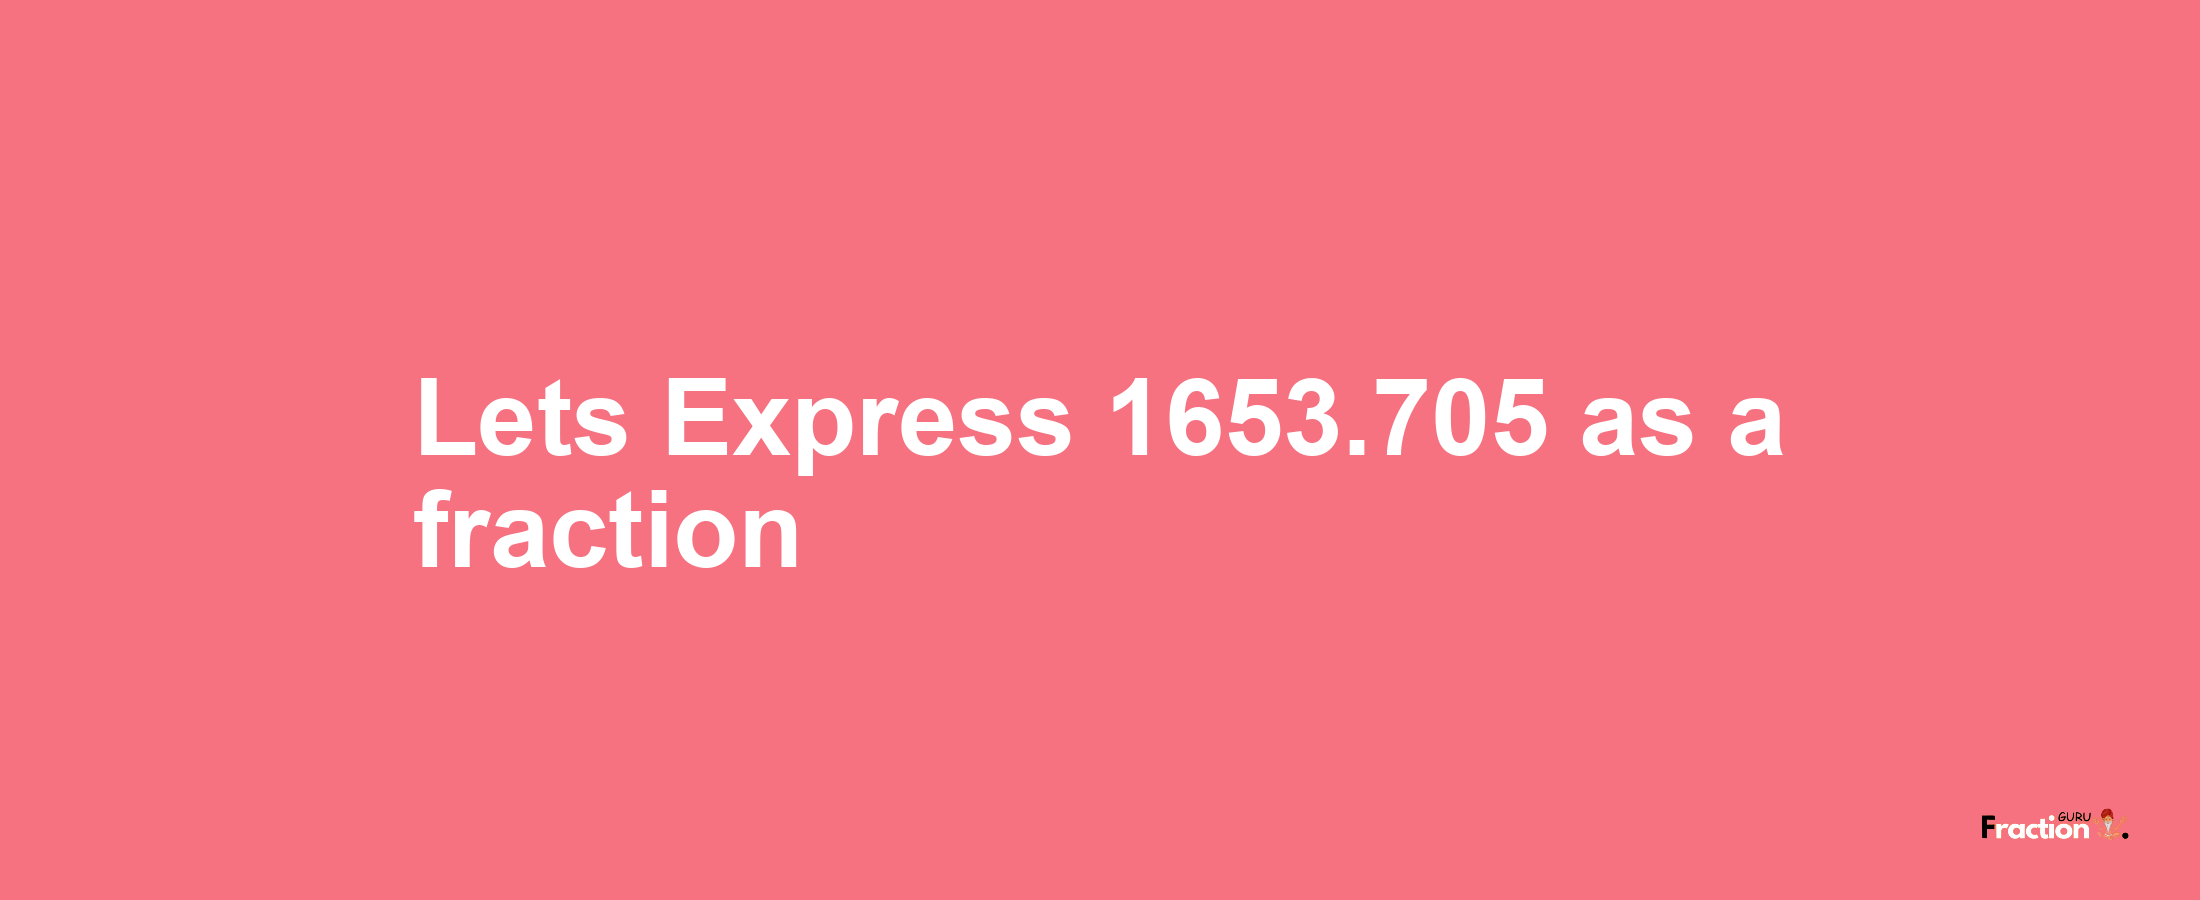 Lets Express 1653.705 as afraction